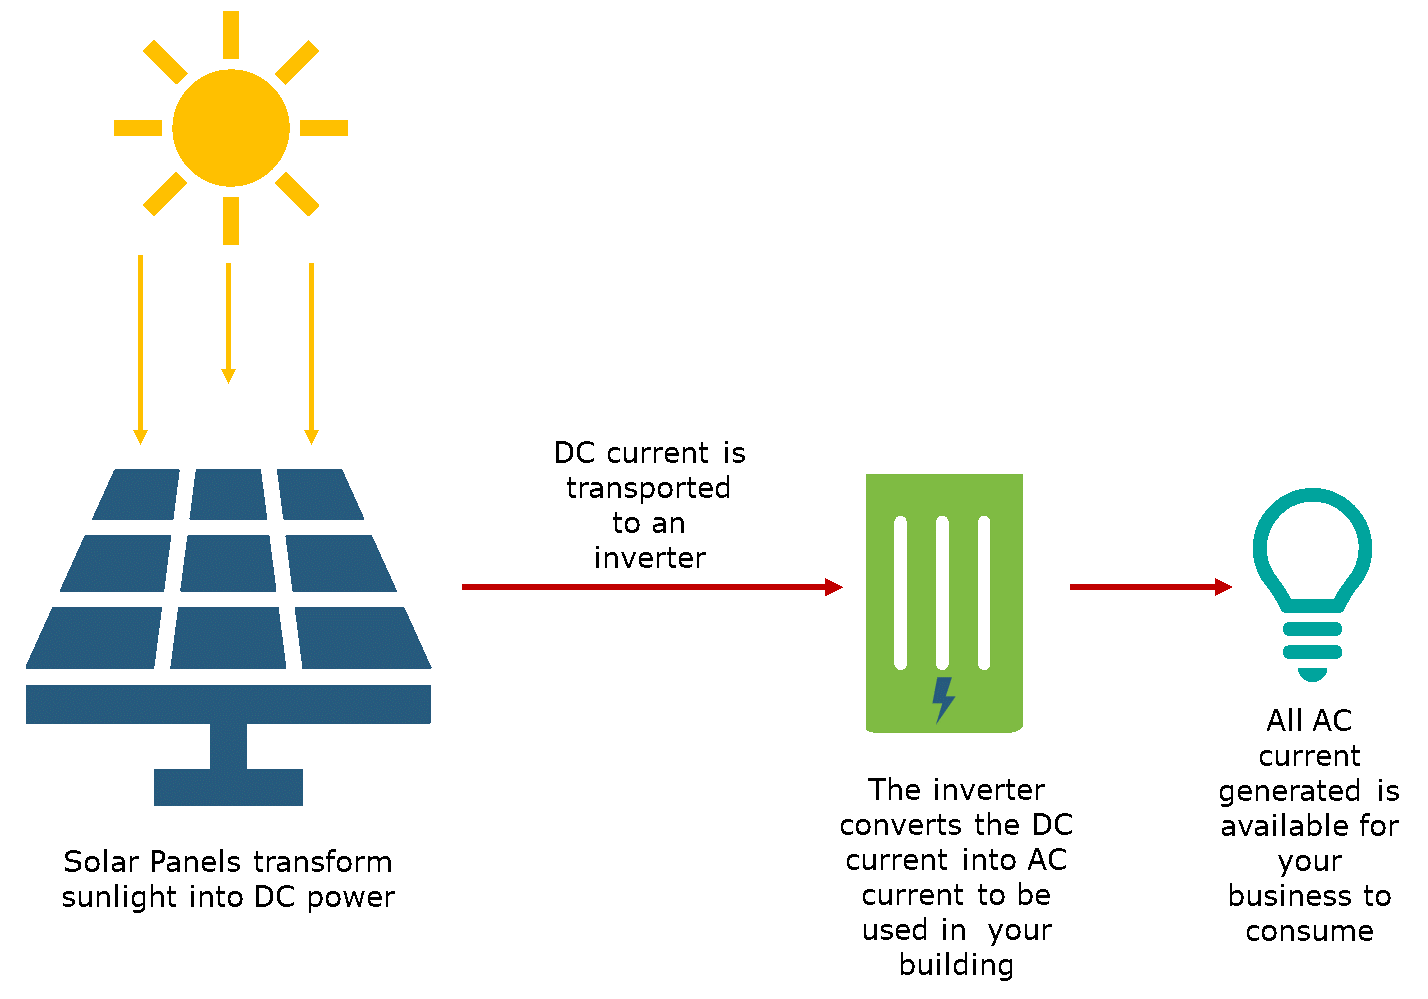 Solar panels transform sunlight into DC power. DC current is transported to an inverter. The inverter converts the DC current into AC current to be used in your building. All AC current generates is available for your business to consume.